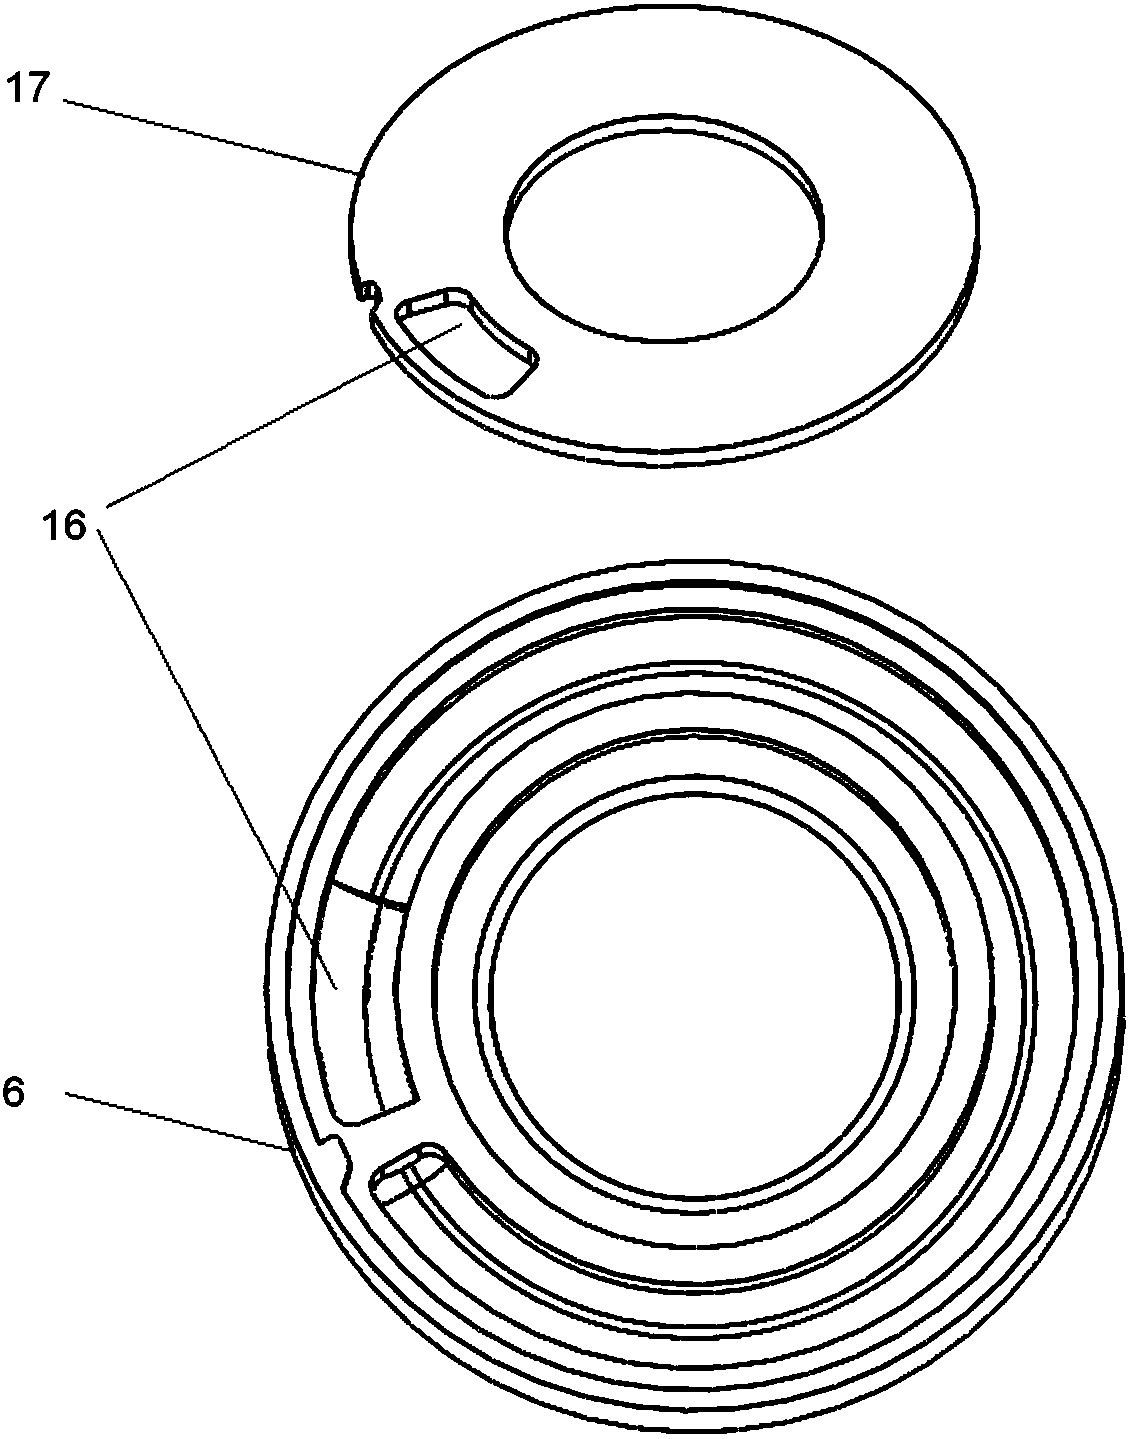 A liquid resistance mount for automobile engine with three liquid chamber structure